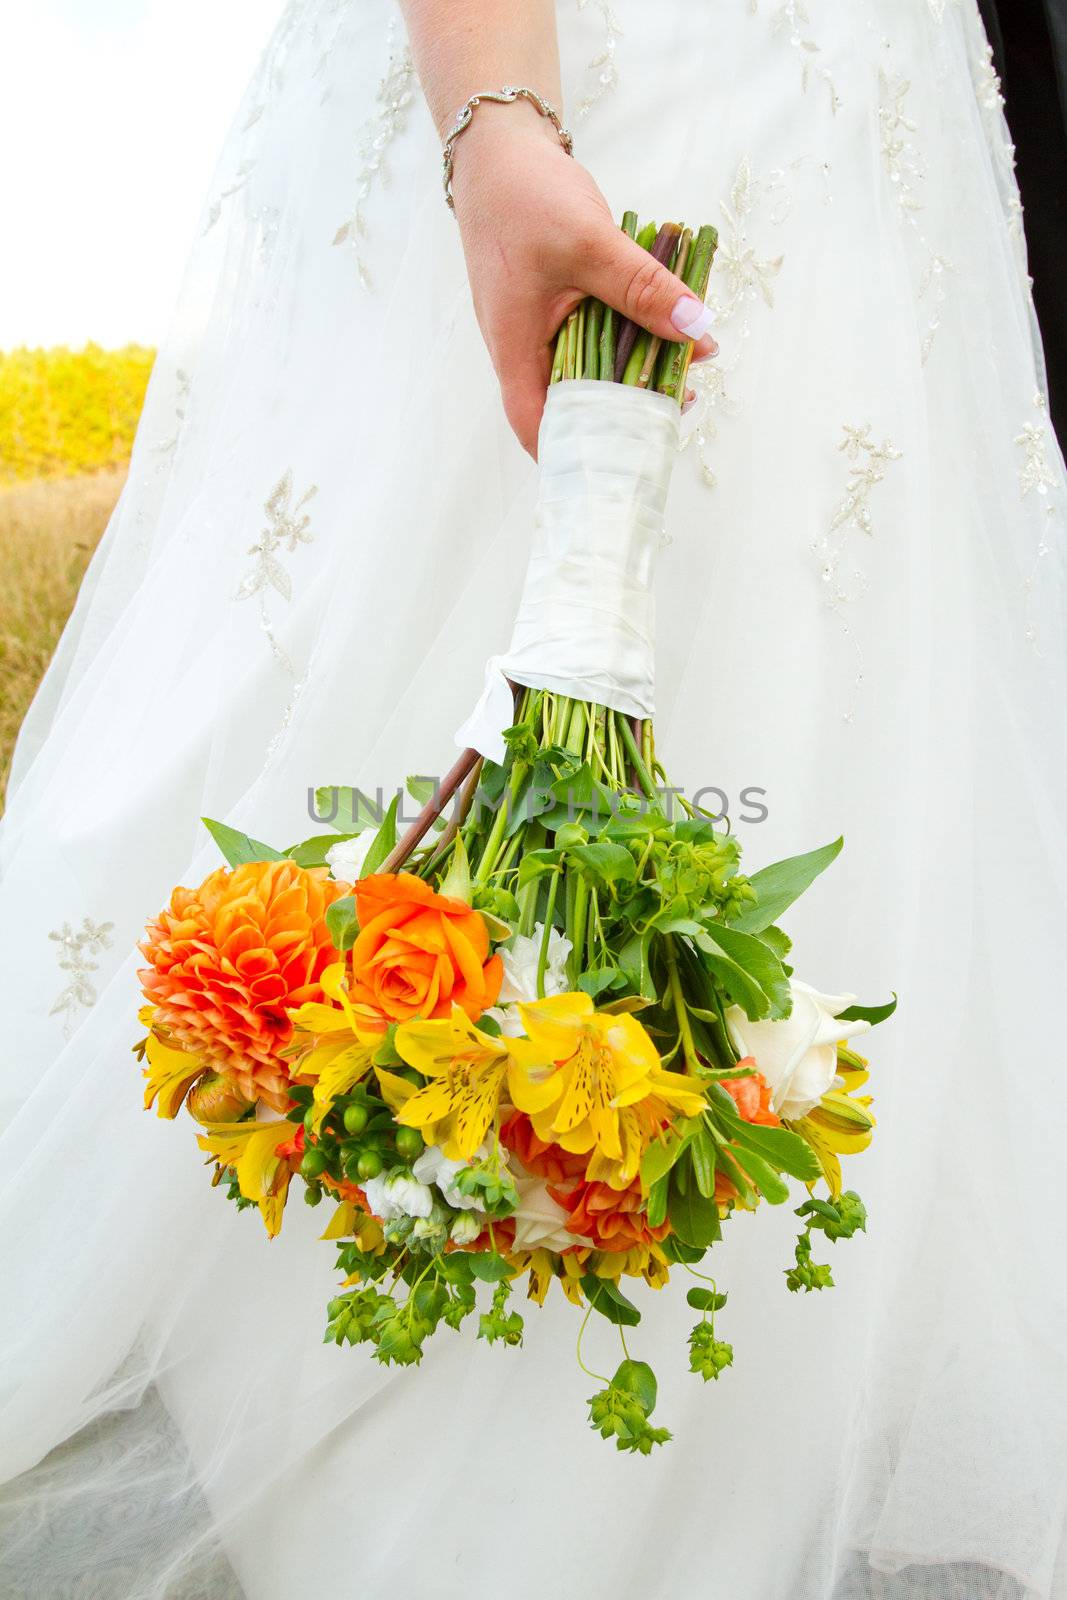 A bride in her white wedding dress holds her bouquet of orange, green, and yellow flowers on her wedding day.